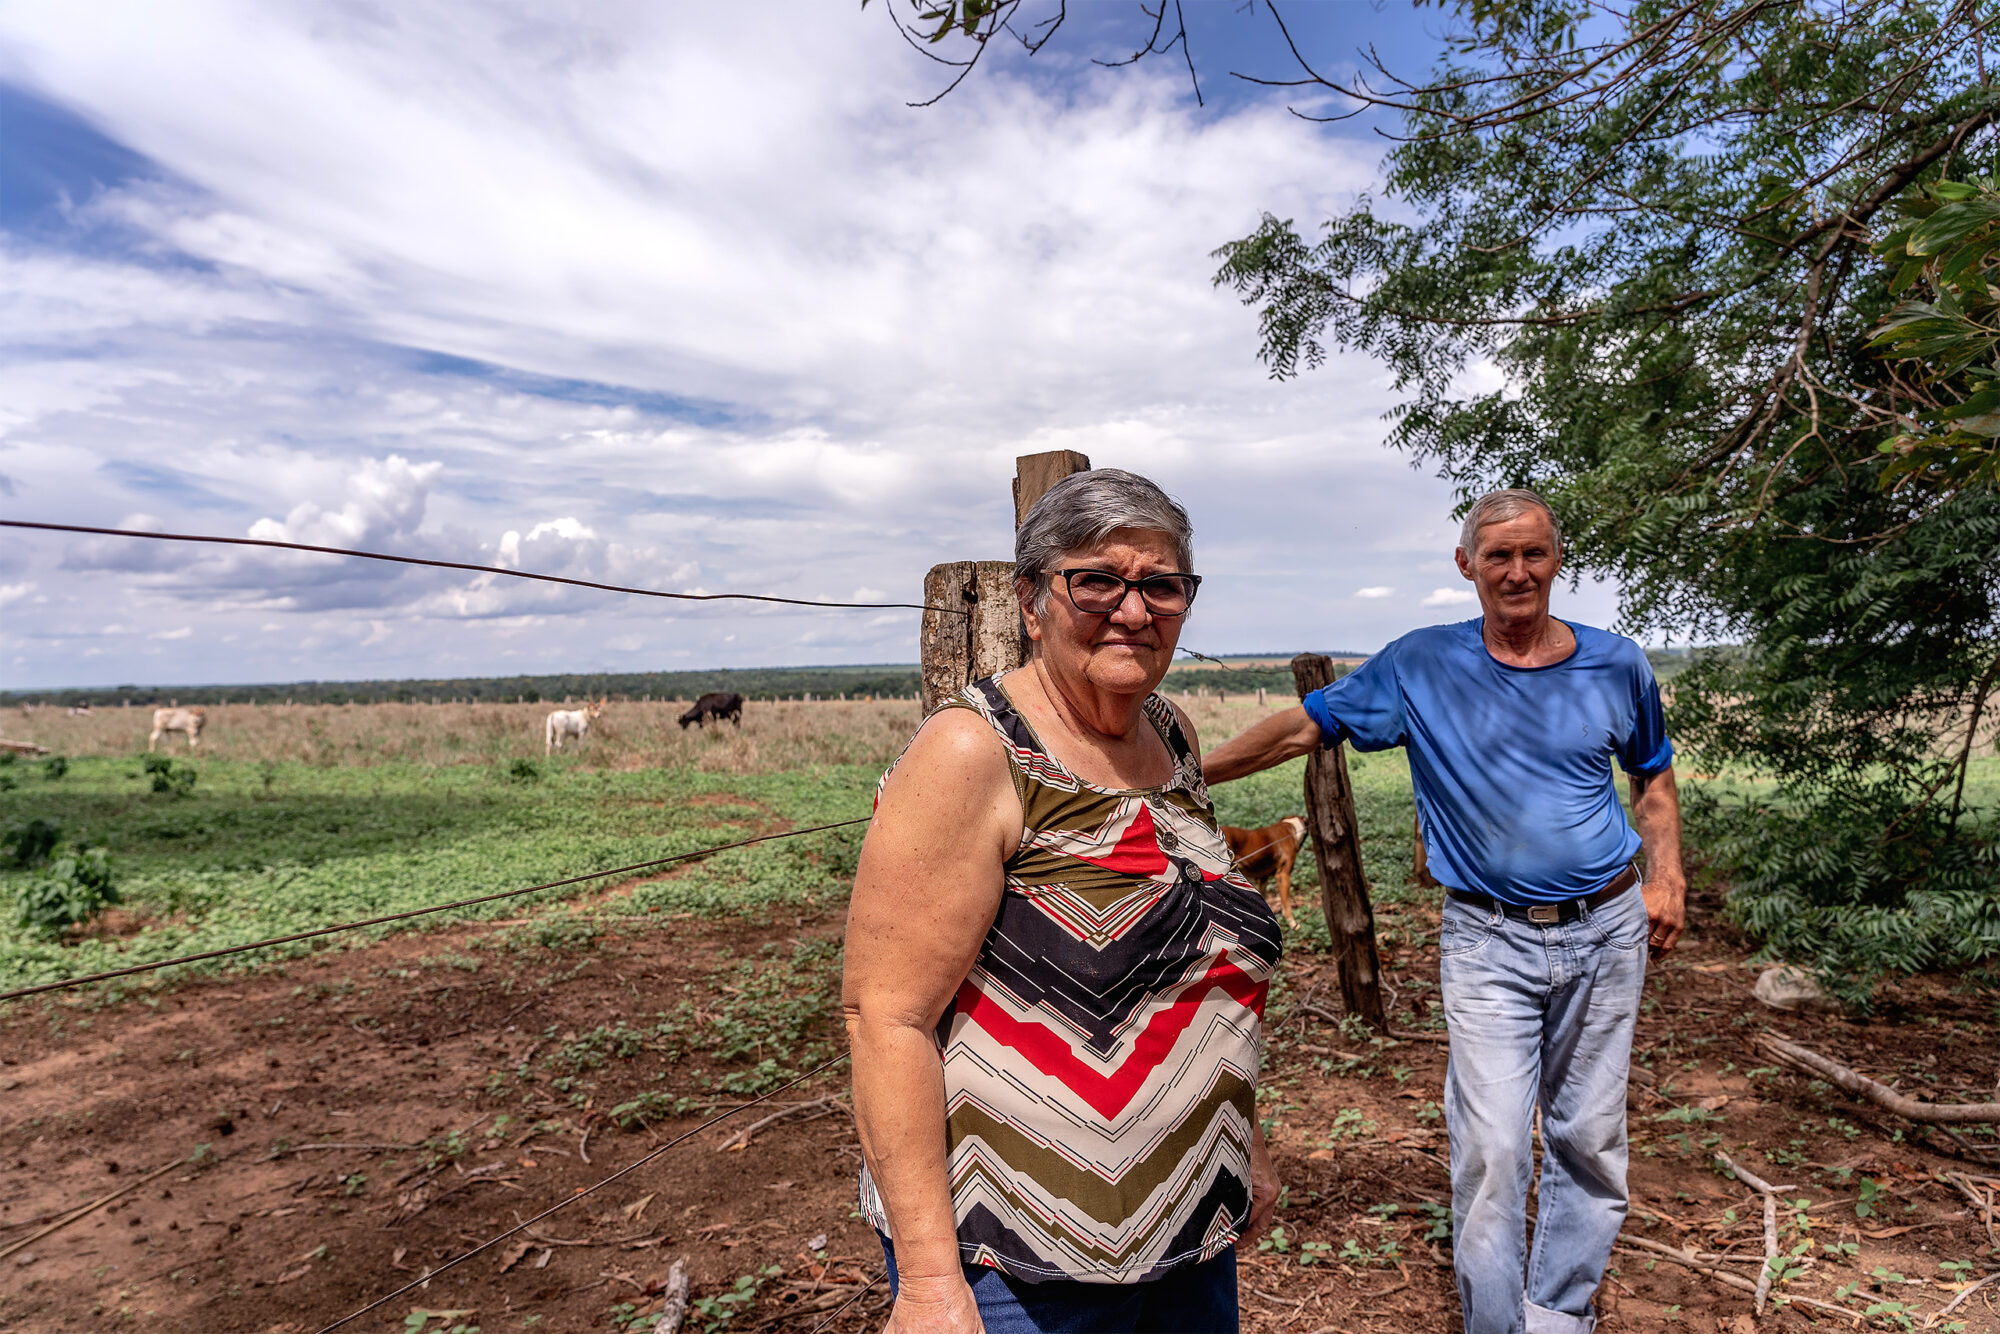 <p>Two decades ago, Evanir and Danilo Pertile migrated to begin farming in Querência, in the Brazilian Amazon. Now, soy plantations are creating challenges for smallholders like them (Image: Flávia Milhorance)</p>